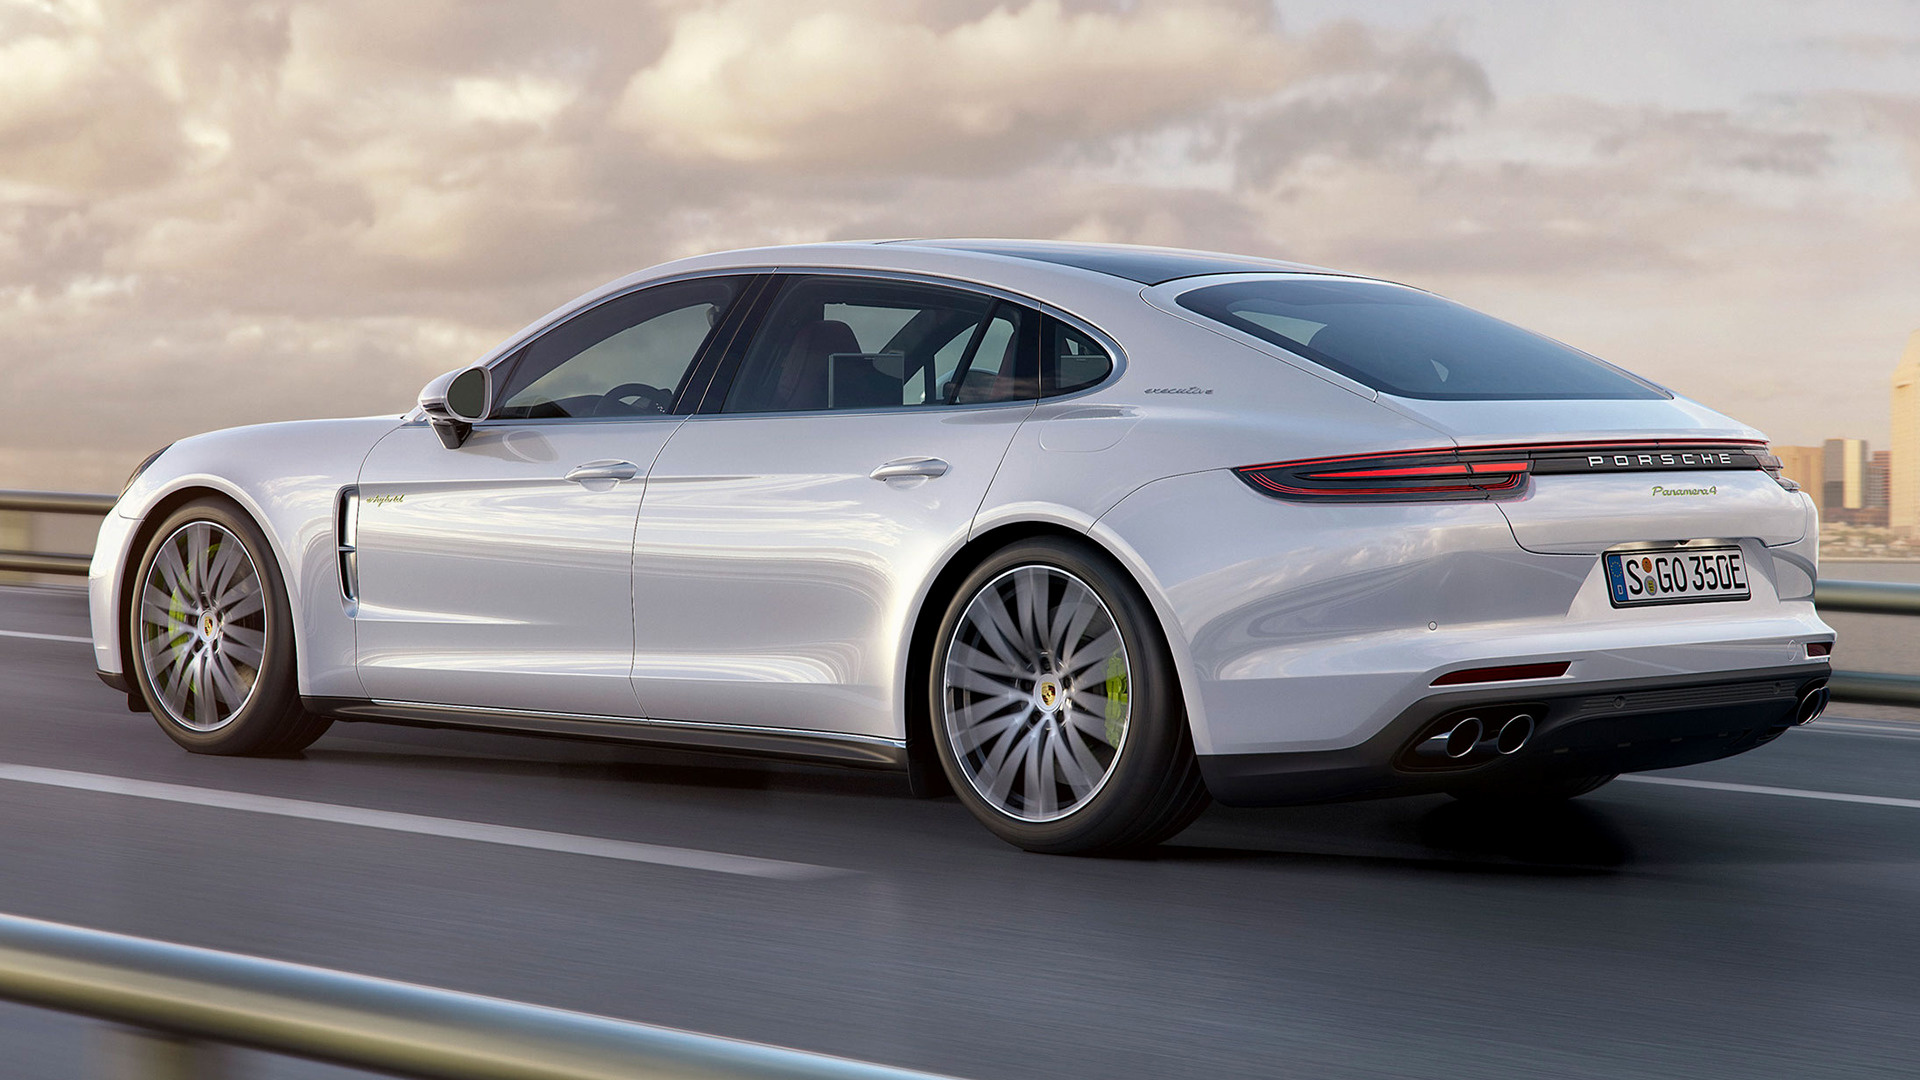 2016 Porsche Panamera E-Hybrid Executive - Wallpapers and HD Images ...